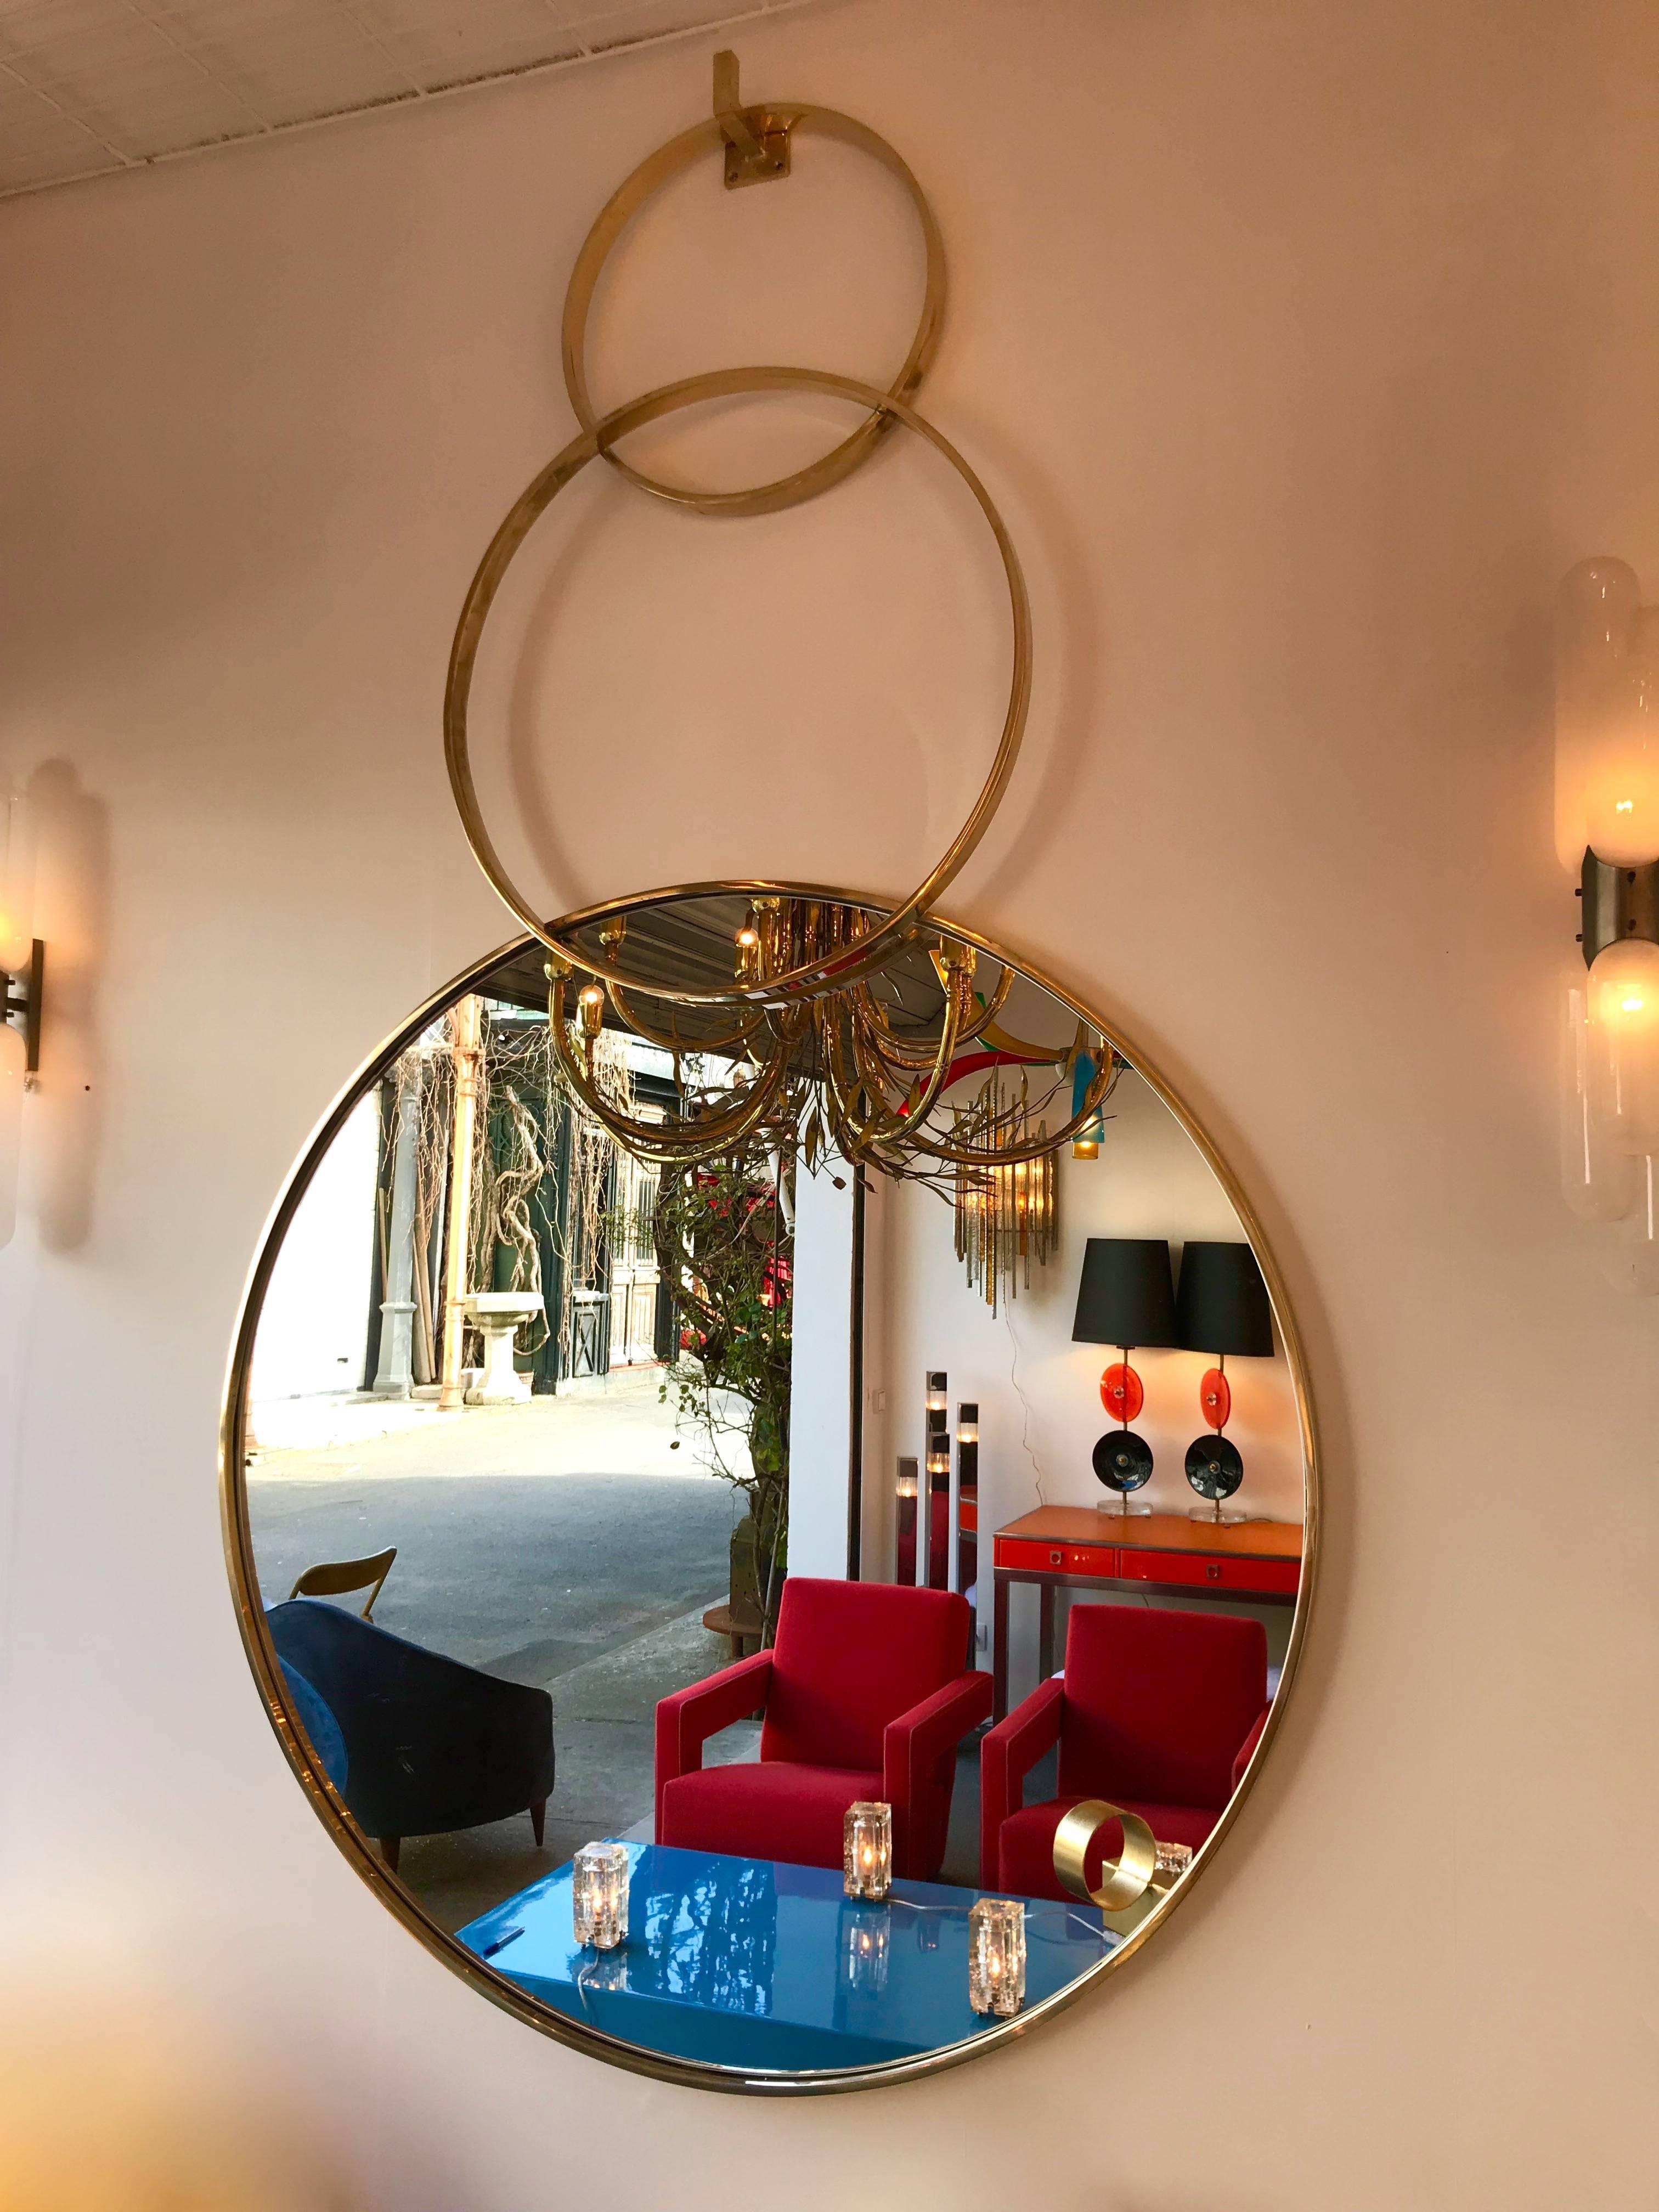 wall mirror three circles, full brass. Really nice massive wall hook to hang the mirror. Small exclusive italian artisanal workshop. Edition of five exemplary. Great manufacturing quality.